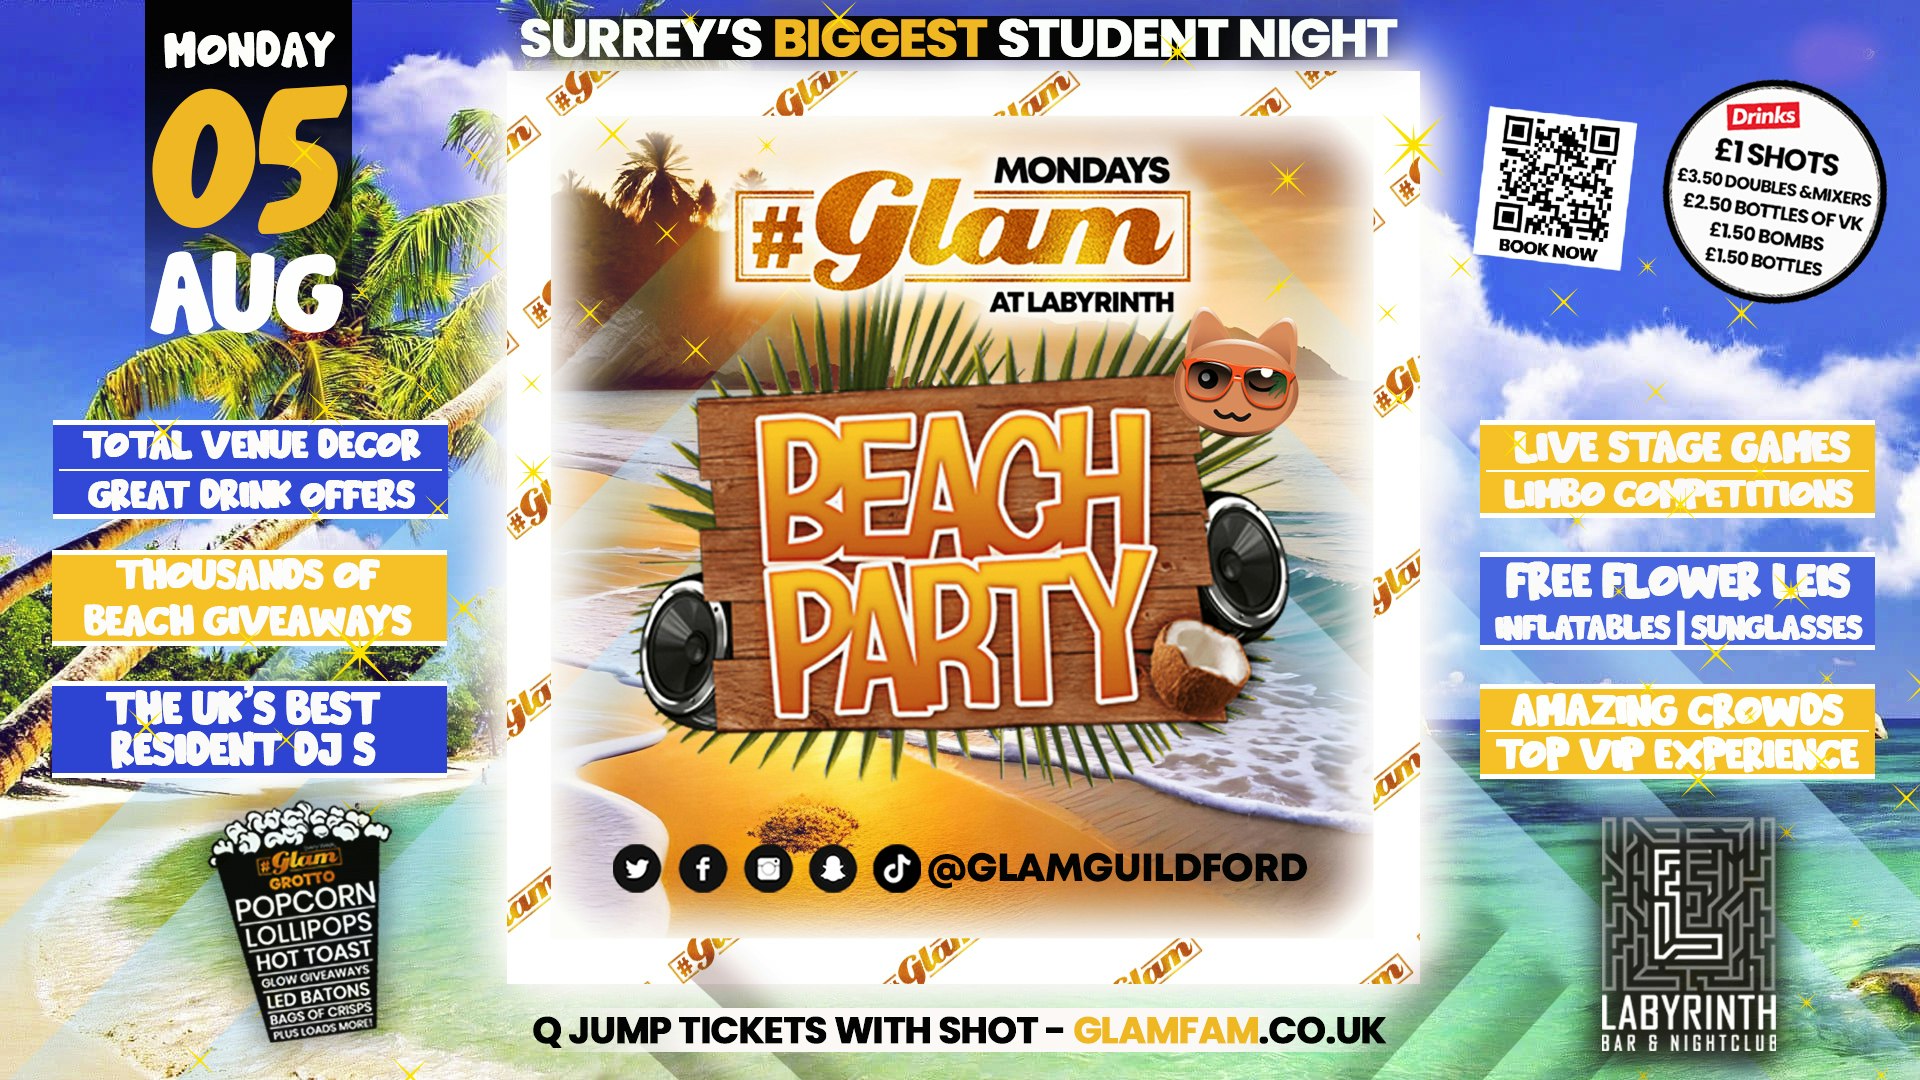 Glam – BEACH PARTY!! 😎 Surrey’s Best Student Events! Mondays at Labs 😻